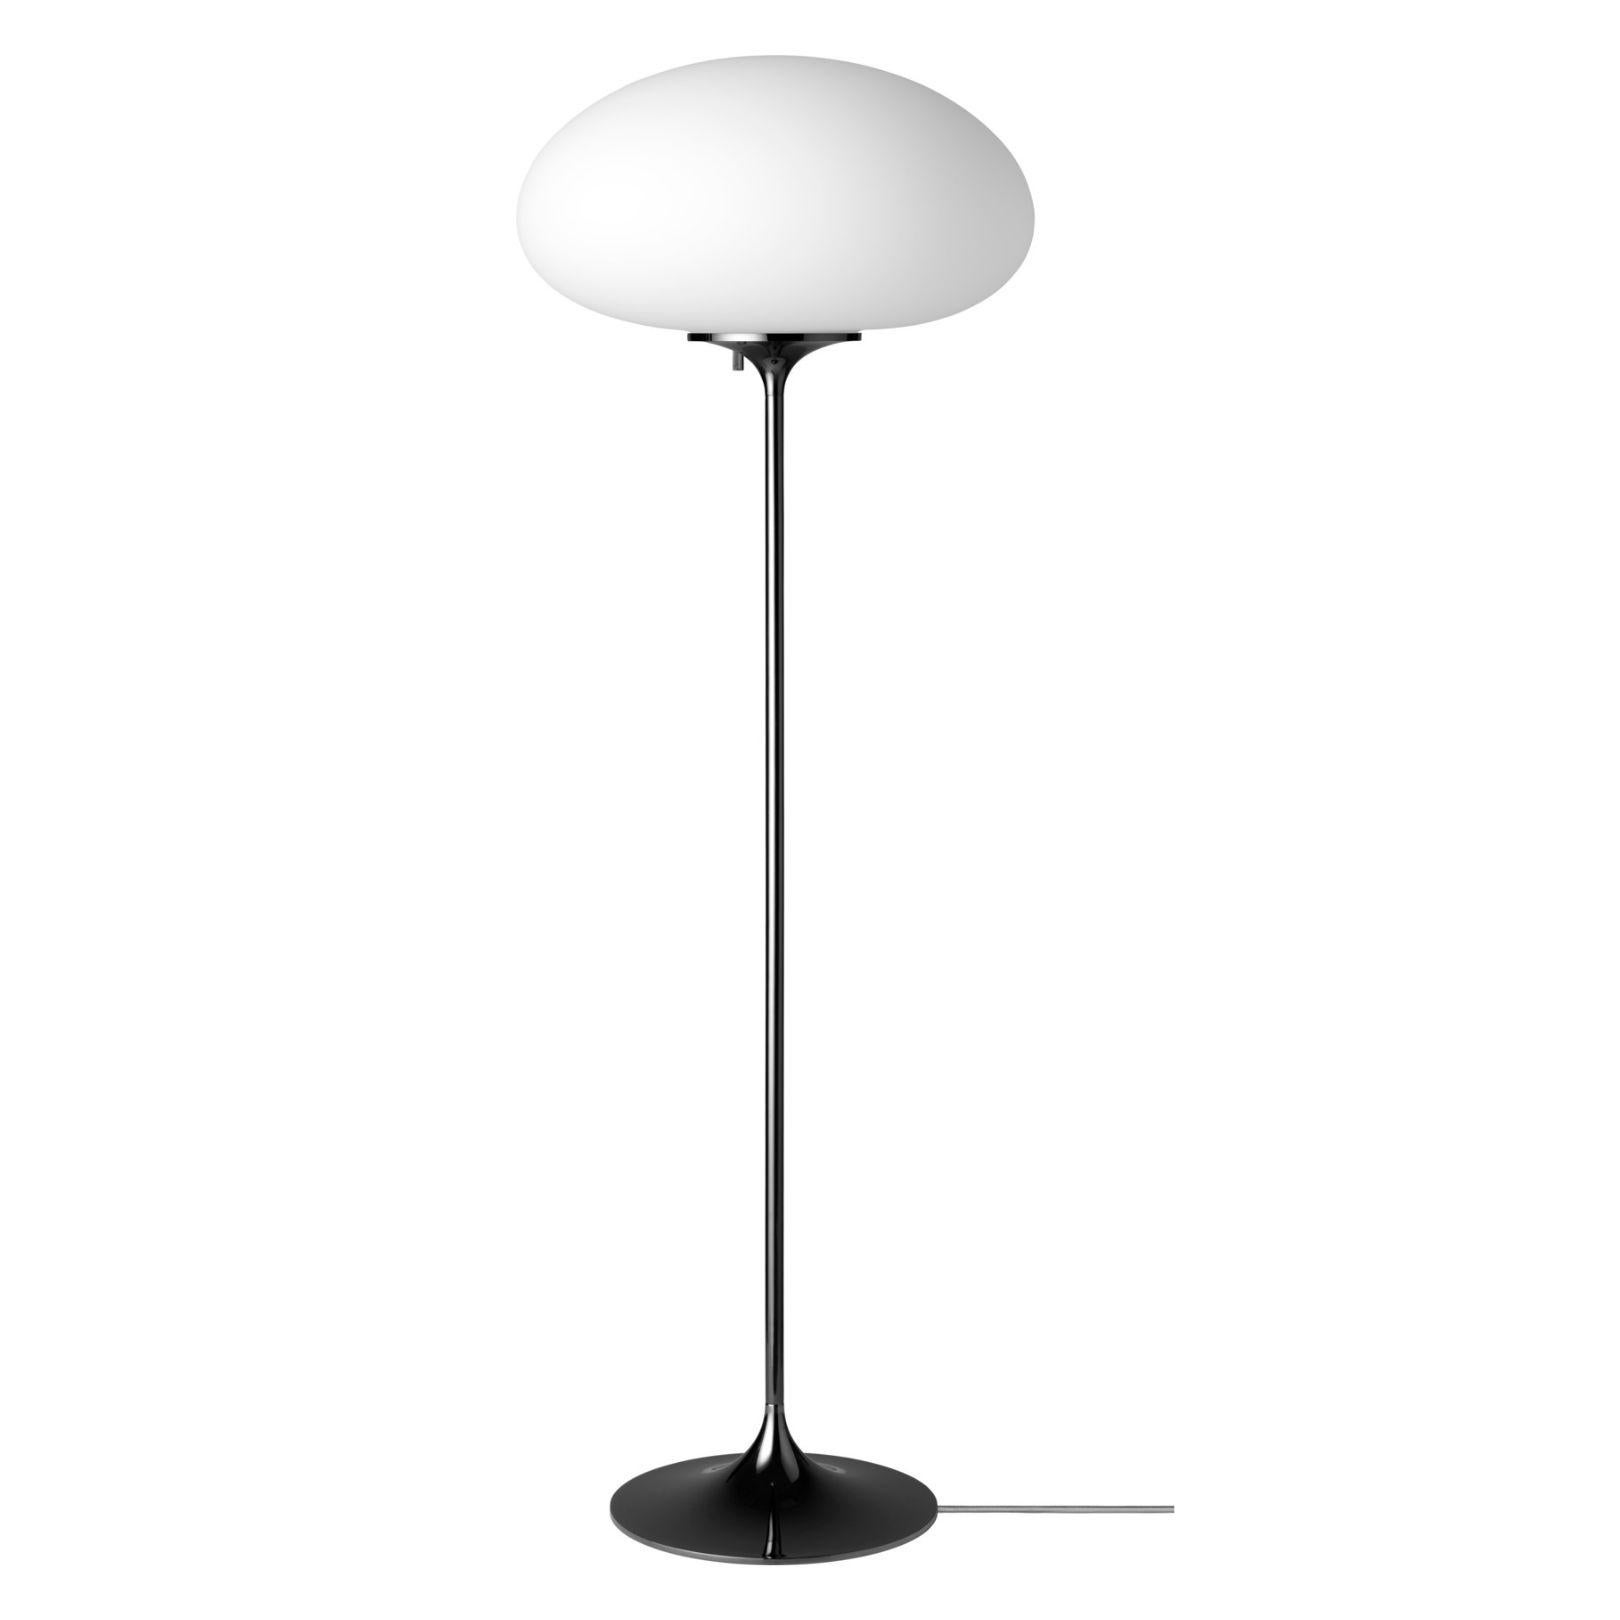 Stemlite Floor Lamp by Bill Curry for GUBI.

Originally conceived in 1962 by designer Bill Curry, the award-winning Stemlite line became known as a 'total look' lamp. The base and shade function as a single unit, and may be mixed and matched with